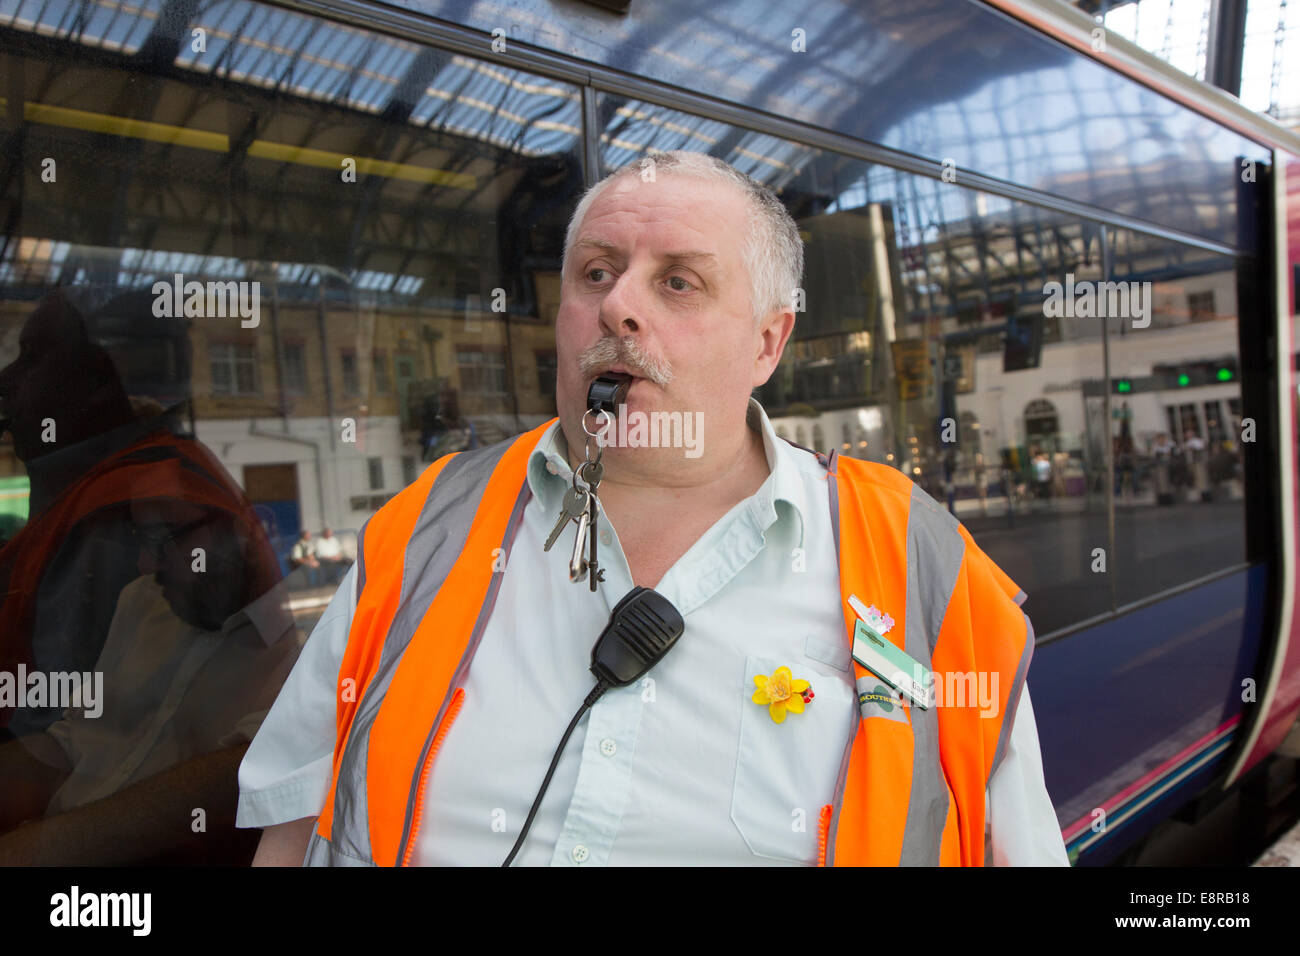 A Signal Man at a railway station prepares to blow his whistle in order to notify the driver to pull away. Brighton Stock Photo